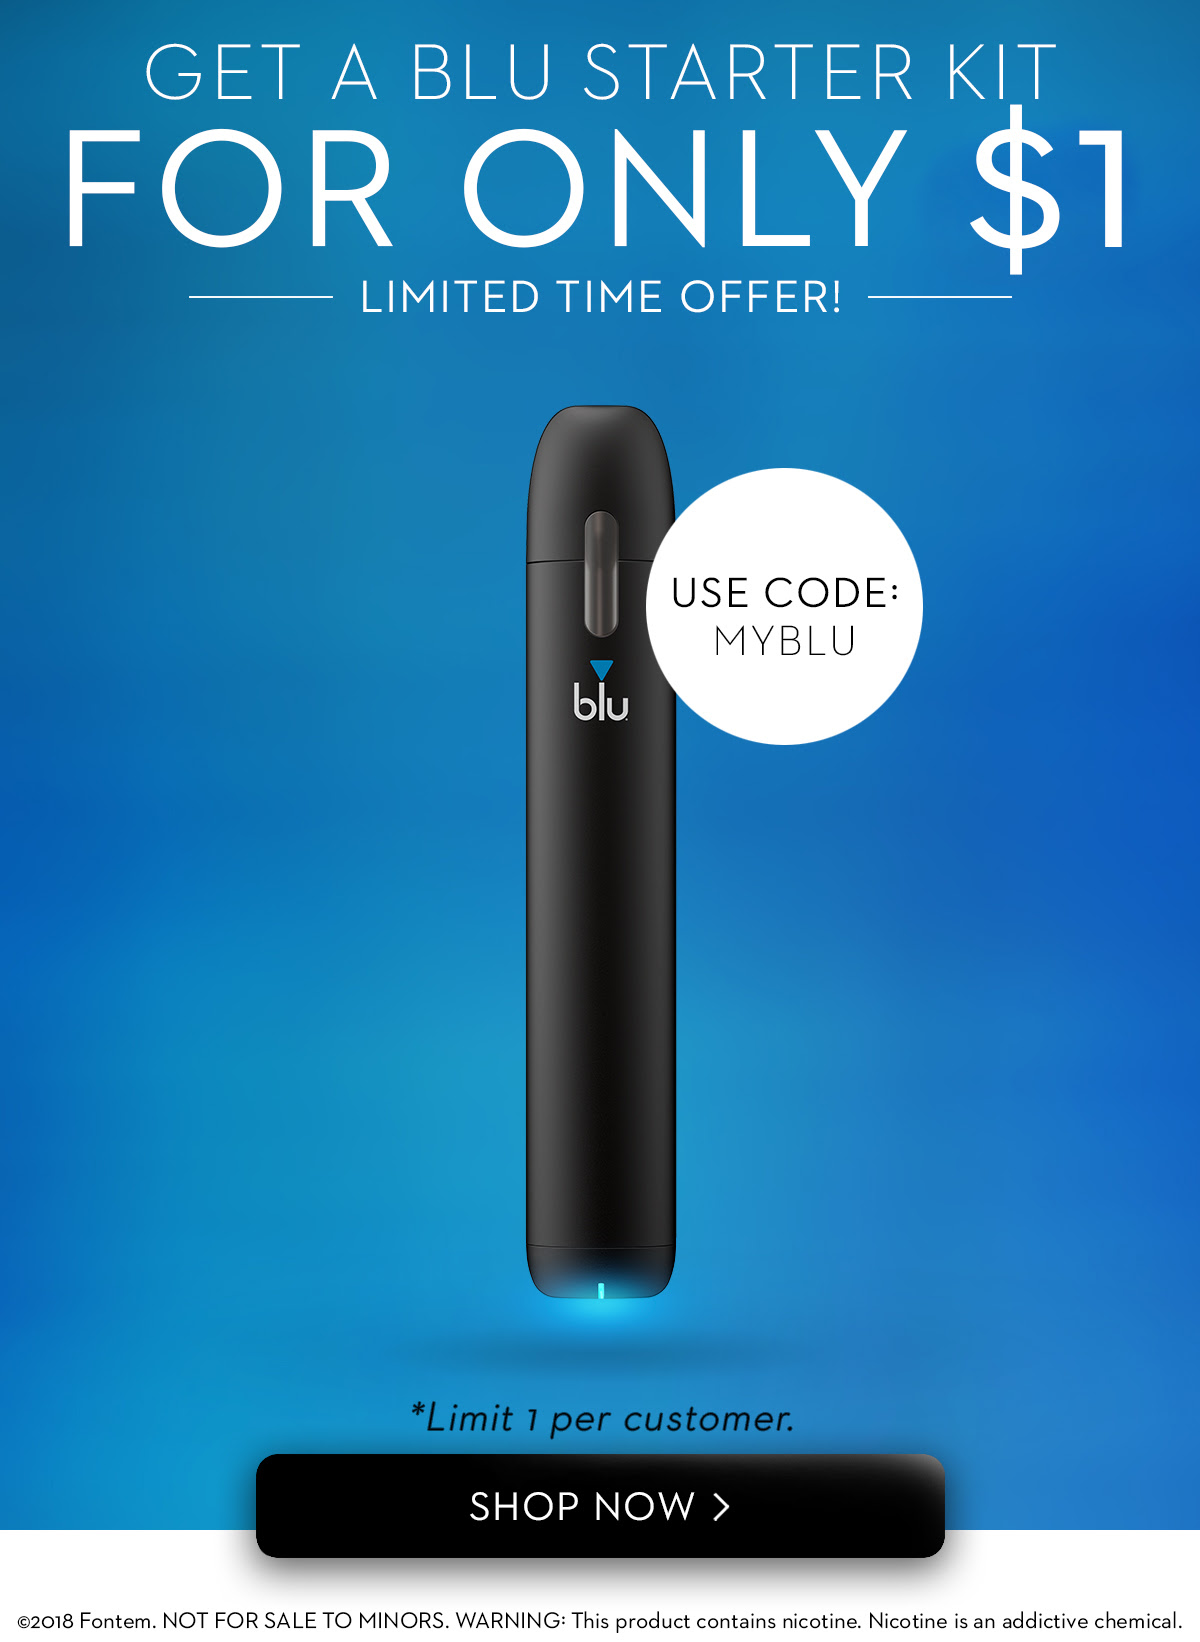 Get a Blu Starter Kit For Only $1 With Code MYBLU